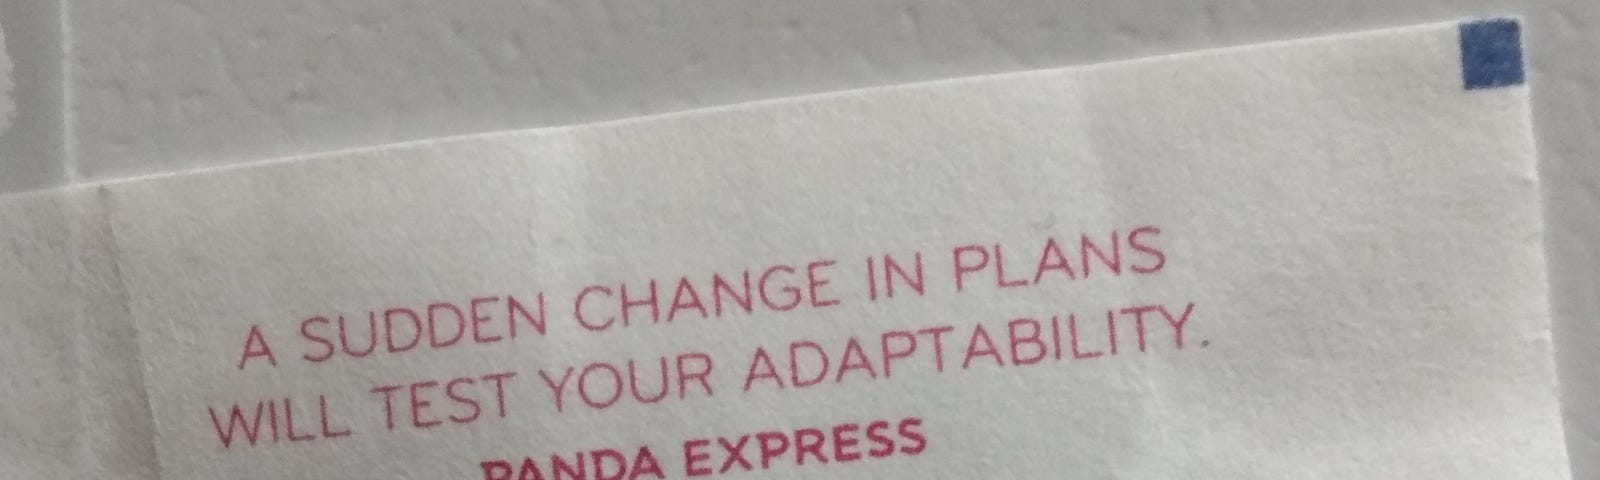 Fortune cookie slip says a sudden change in plans will test your adaptability.